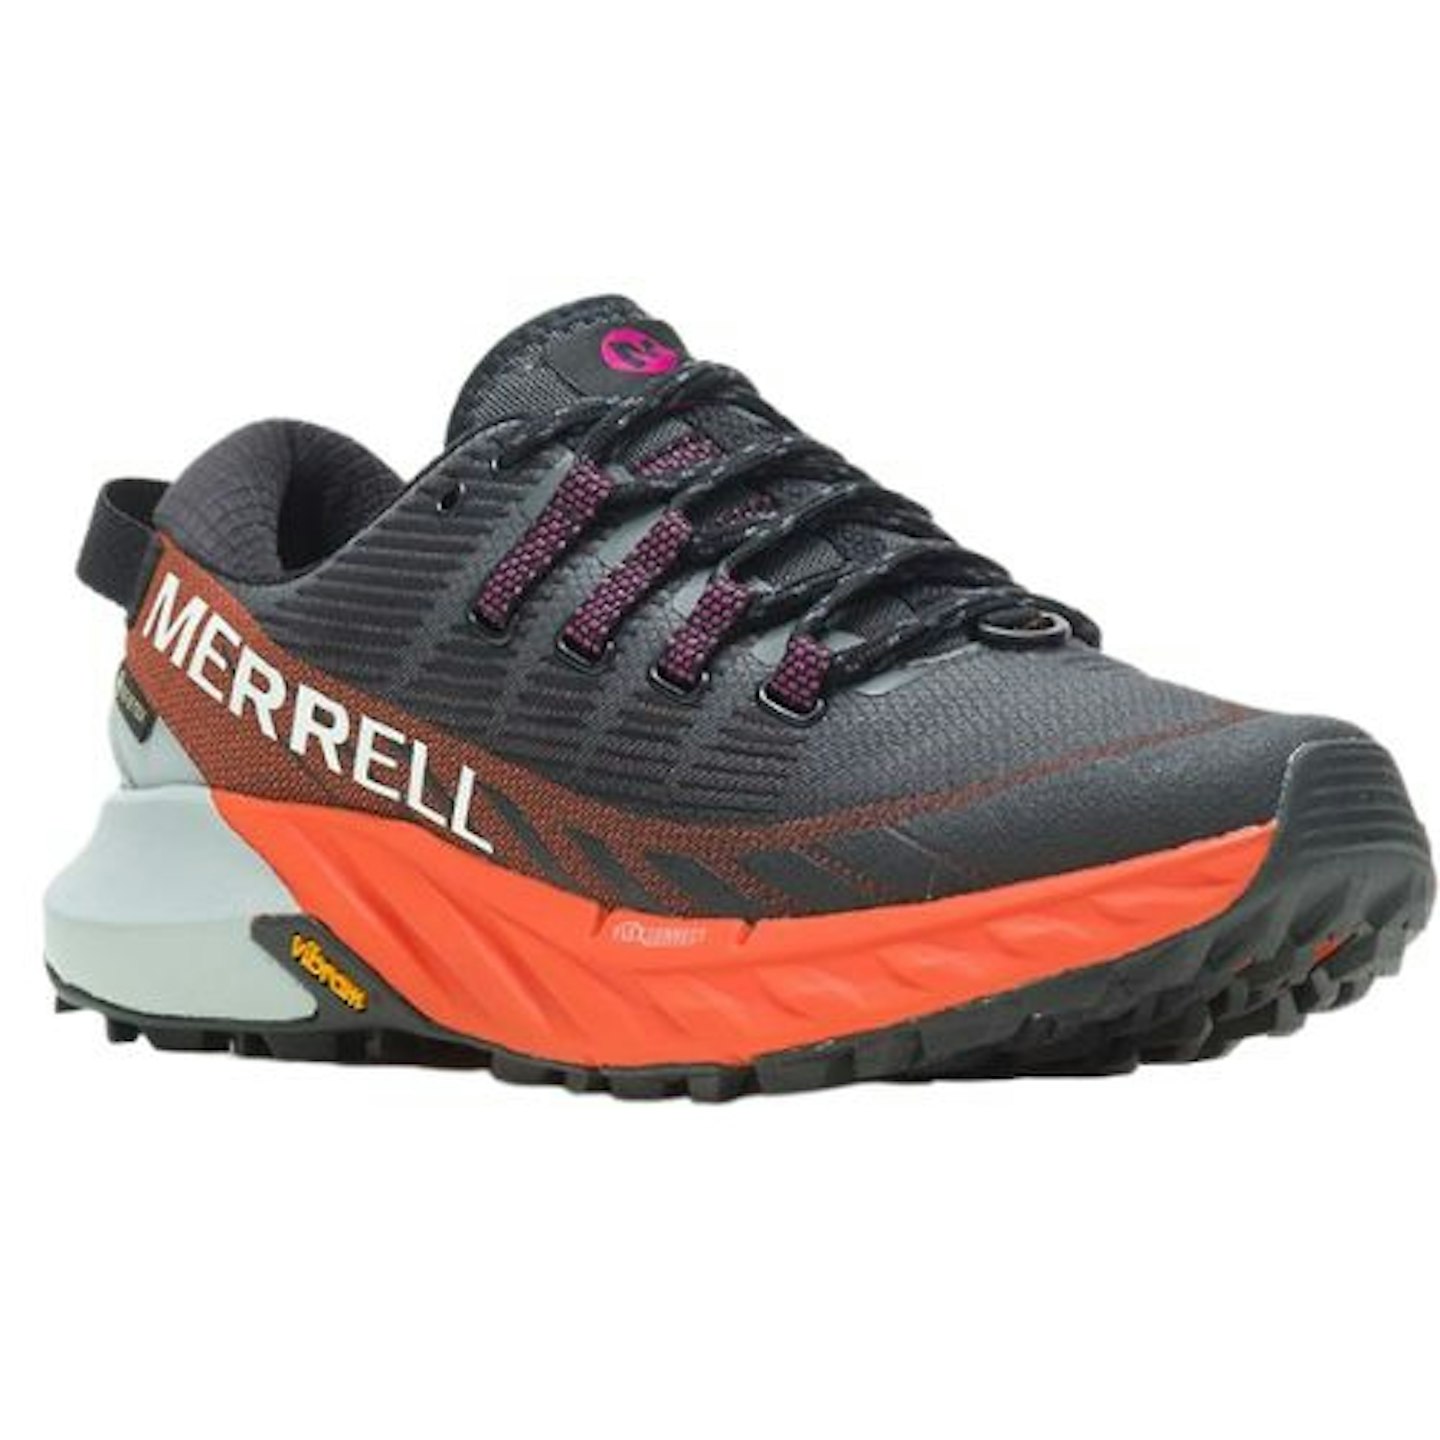 Merrell Agility Peak 4 GTX | Tested and reviewed